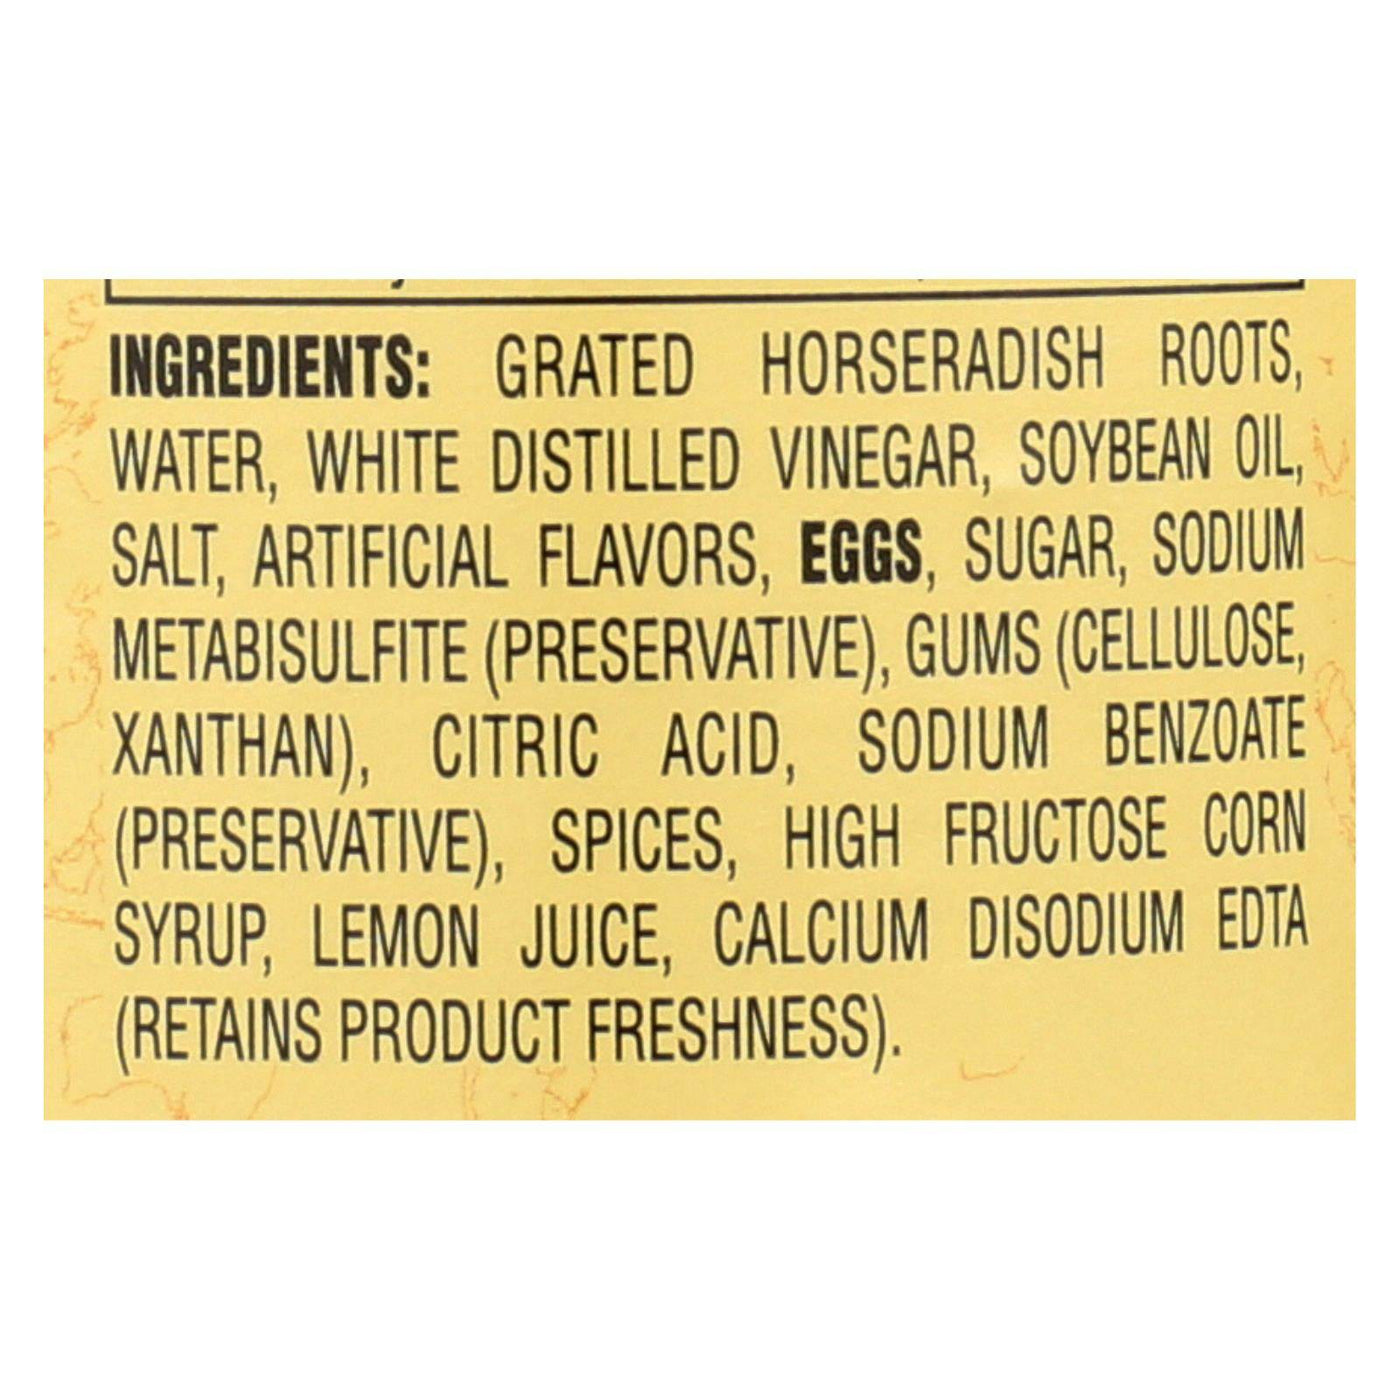 Buy Reese Horseradish - Prepared - Case Of 12 - 6.5 Oz  at OnlyNaturals.us